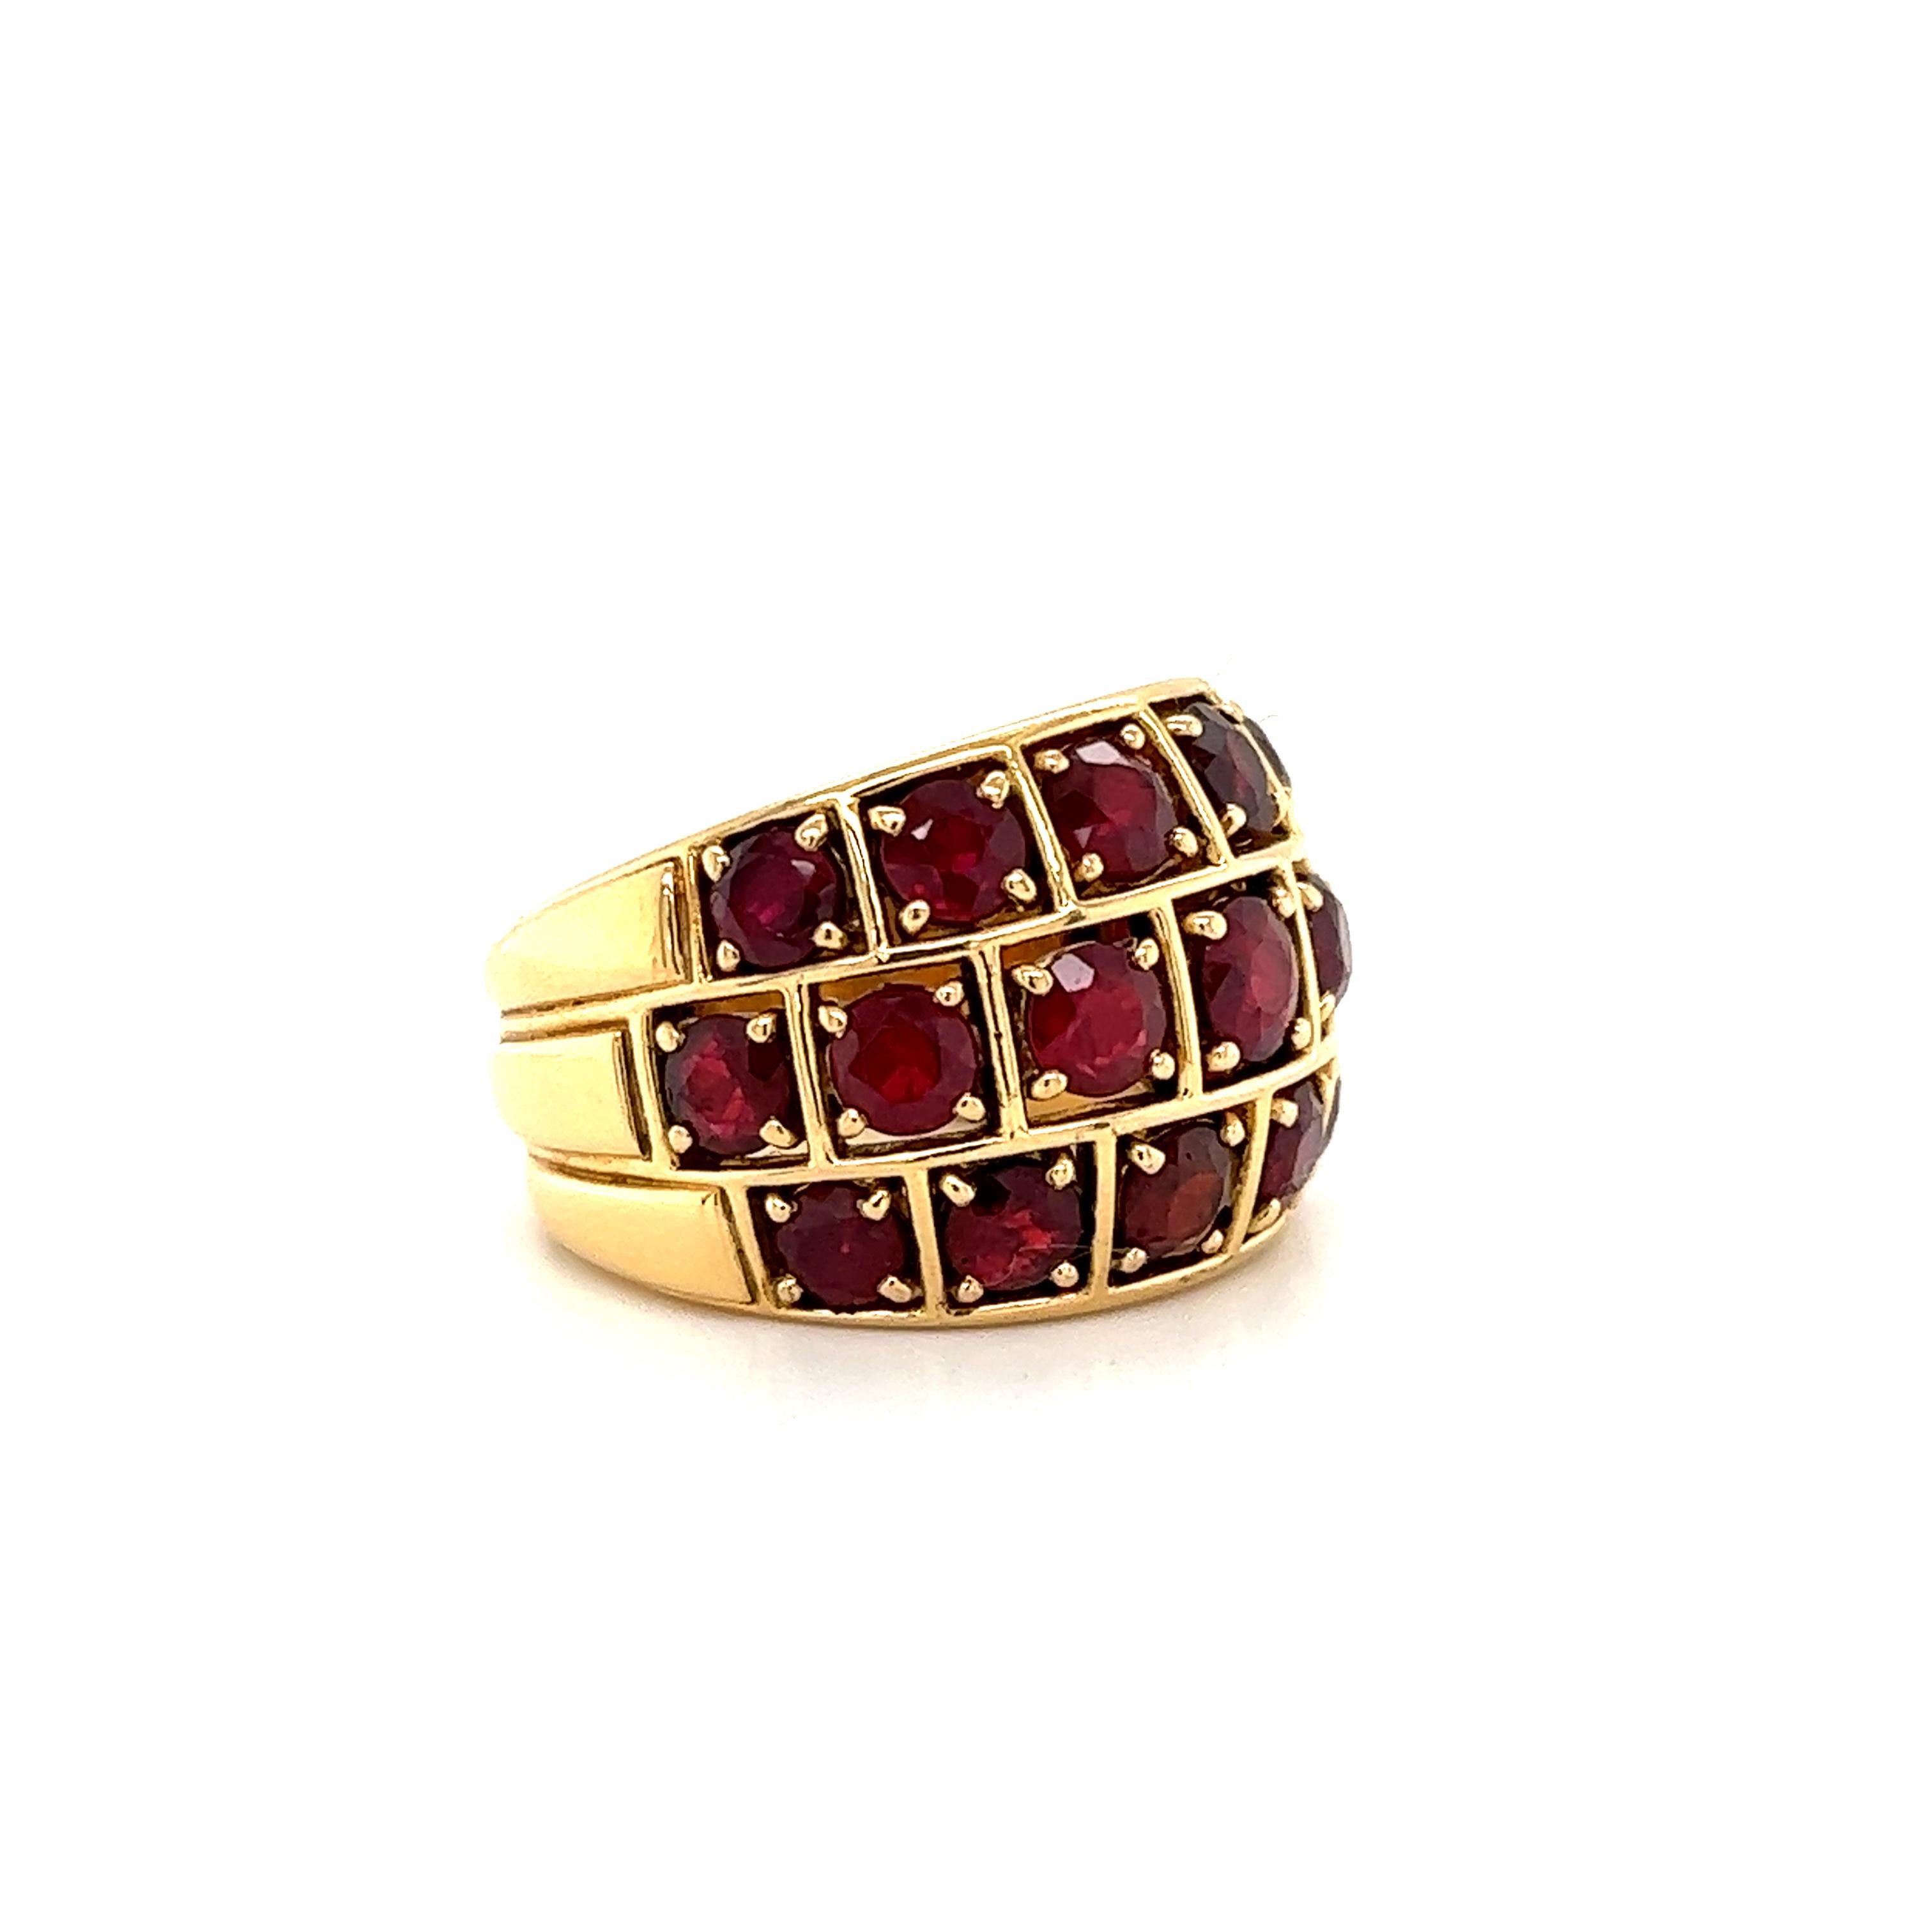 Beautiful ring crafted in 18k yellow gold. The ring is extremely durable and well made. The ring weighs 20 grams and is highlighted with three rows of Burmese rubies that graduate in size across the design. The ruby gemstones display a beautiful